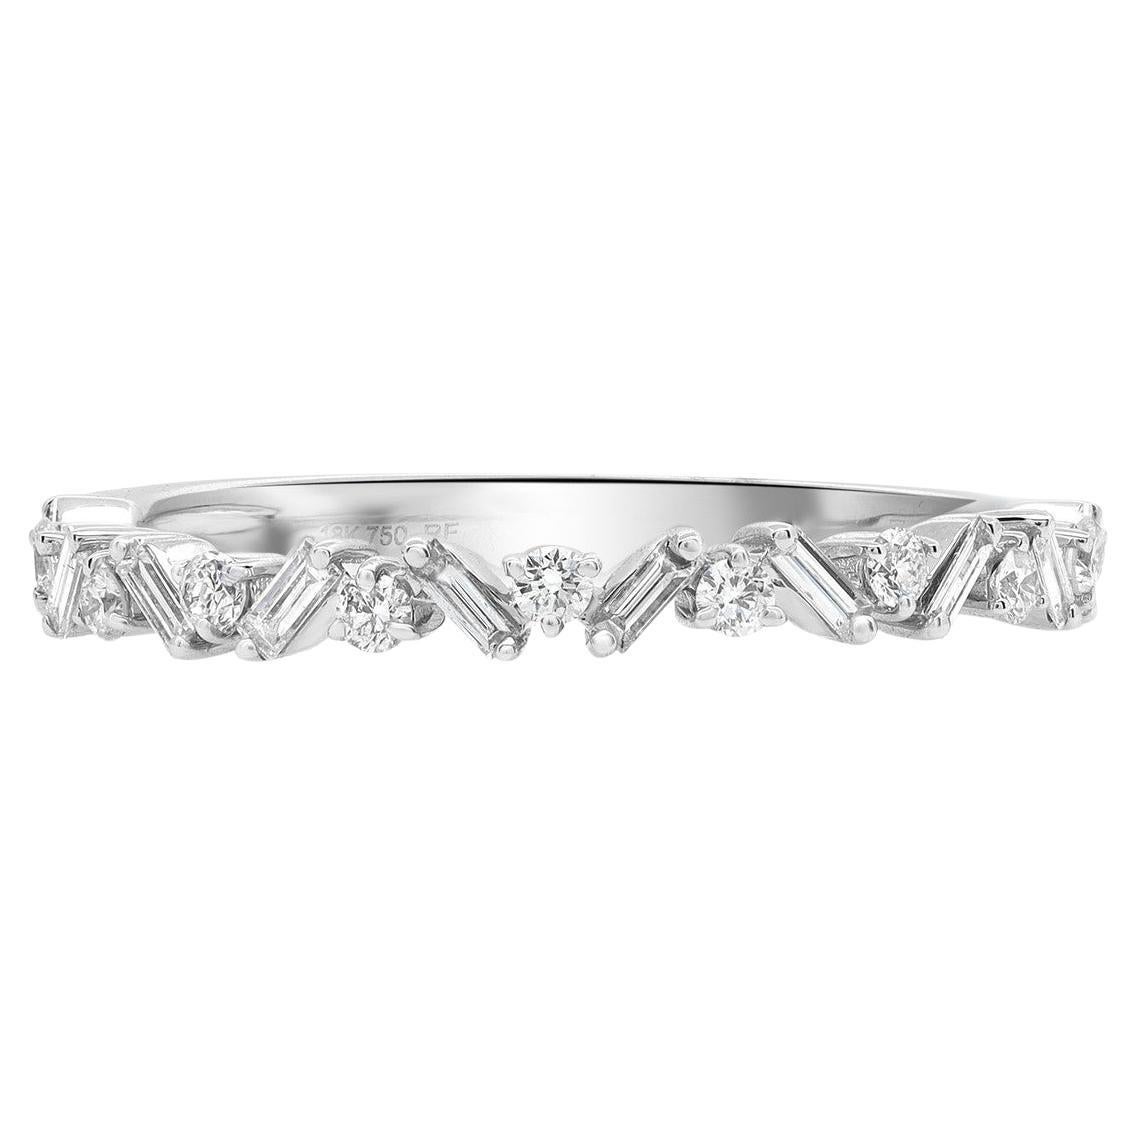 0.30 Carat Baguette & Round Cut Diamond Ring 18K White Gold For Sale